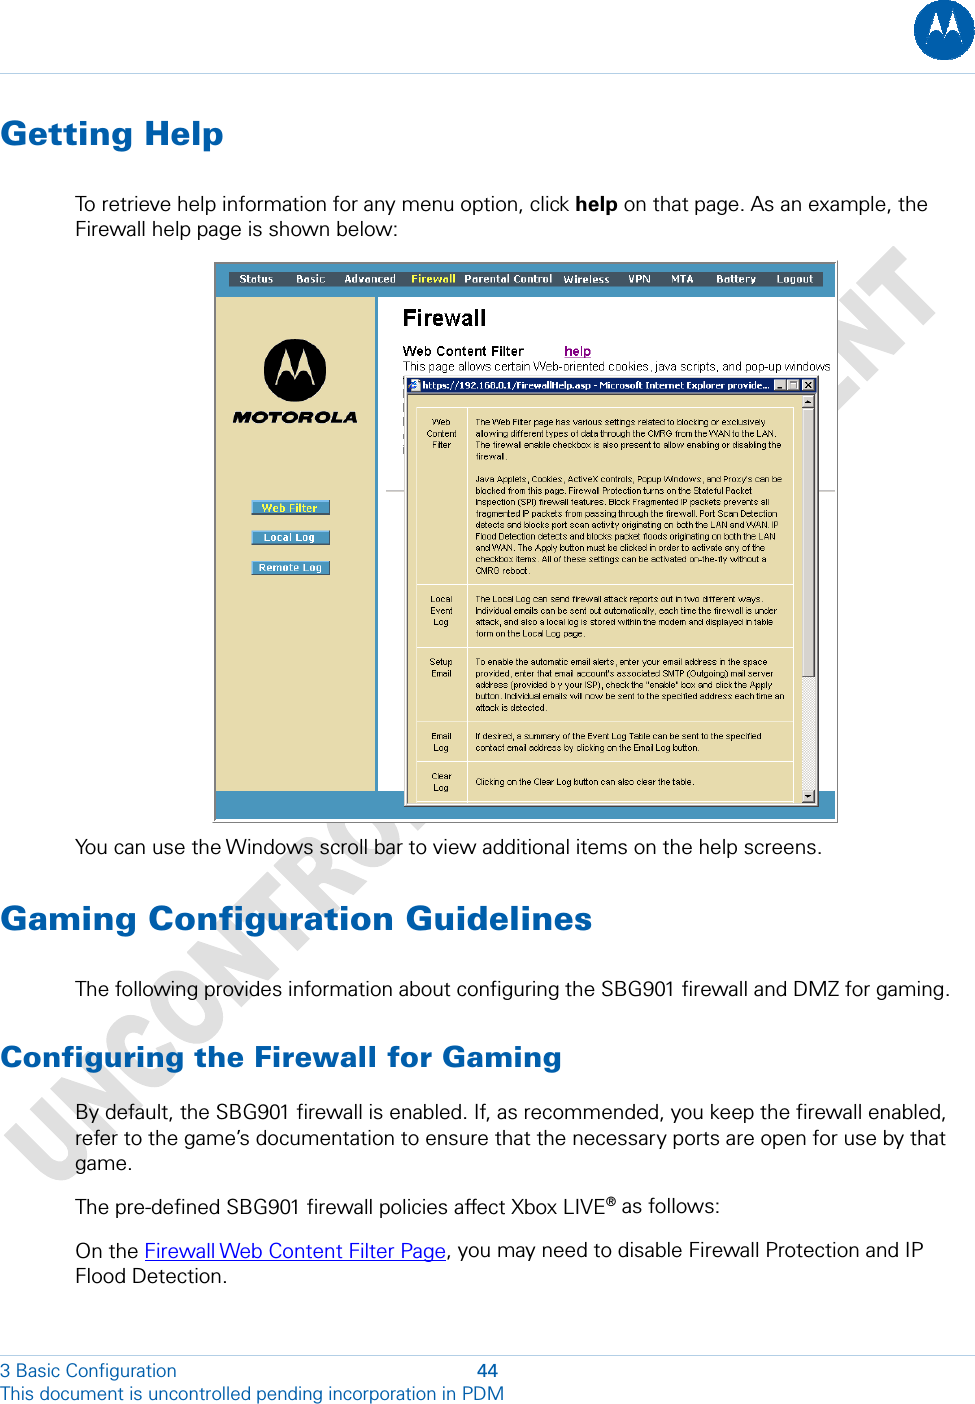  Getting Help To retrieve help information for any menu option, click help on that page. As an example, the Firewall help page is shown below:  You can use the Windows scroll bar to view additional items on the help screens. Gaming Configuration Guidelines The following provides information about configuring the SBG901 firewall and DMZ for gaming. Configuring the Firewall for Gaming By default, the SBG901 firewall is enabled. If, as recommended, you keep the firewall enabled, refer to the game’s documentation to ensure that the necessary ports are open for use by that game. The pre-defined SBG901 firewall policies affect Xbox LIVE® as follows: On the Firewall Web Content Filter Page, you may need to disable Firewall Protection and IP Flood Detection. 3 Basic Configuration  44 This document is uncontrolled pending incorporation in PDM  